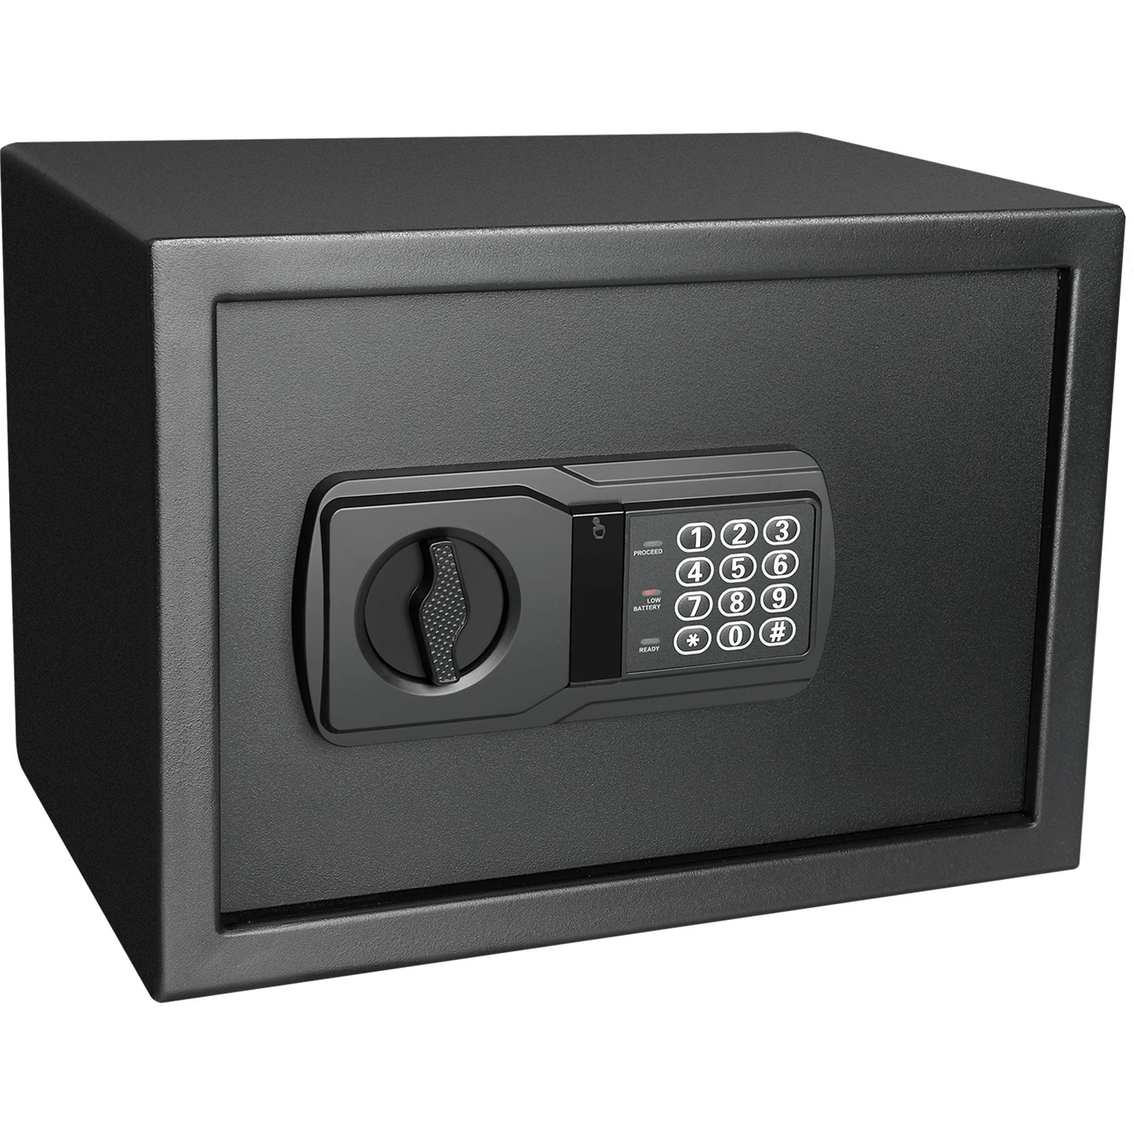 Fortress Medium Personal Safe with Electronic Lock - Image 2 of 4